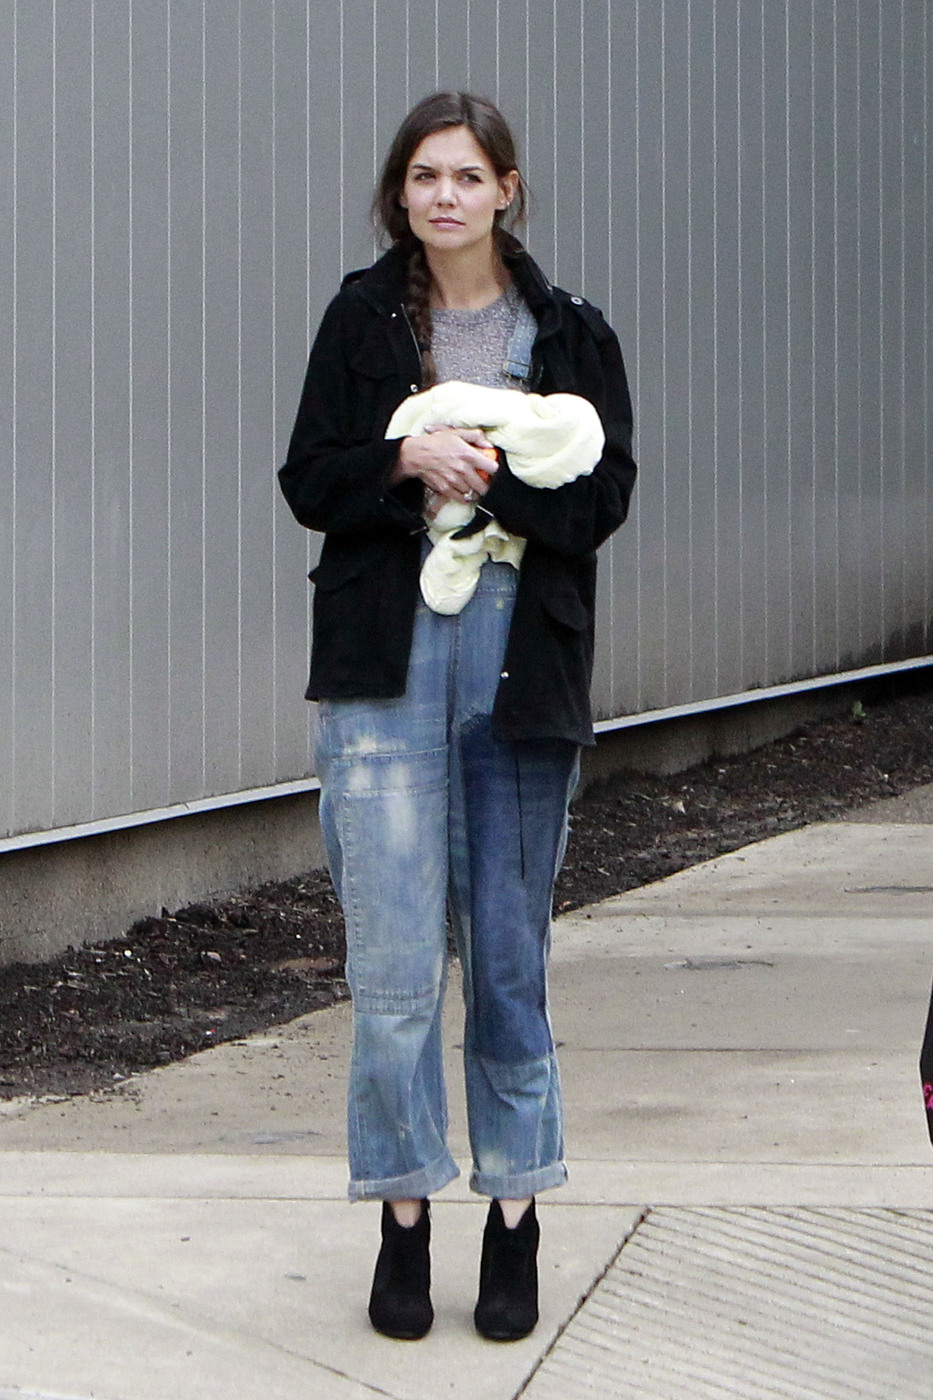 OH NO! Suri Cruise watches on as her ice cream accidentally falls onto the floor after leaving The Milk Shake Factory in Pittsburgh with her mom, Katie Holmes